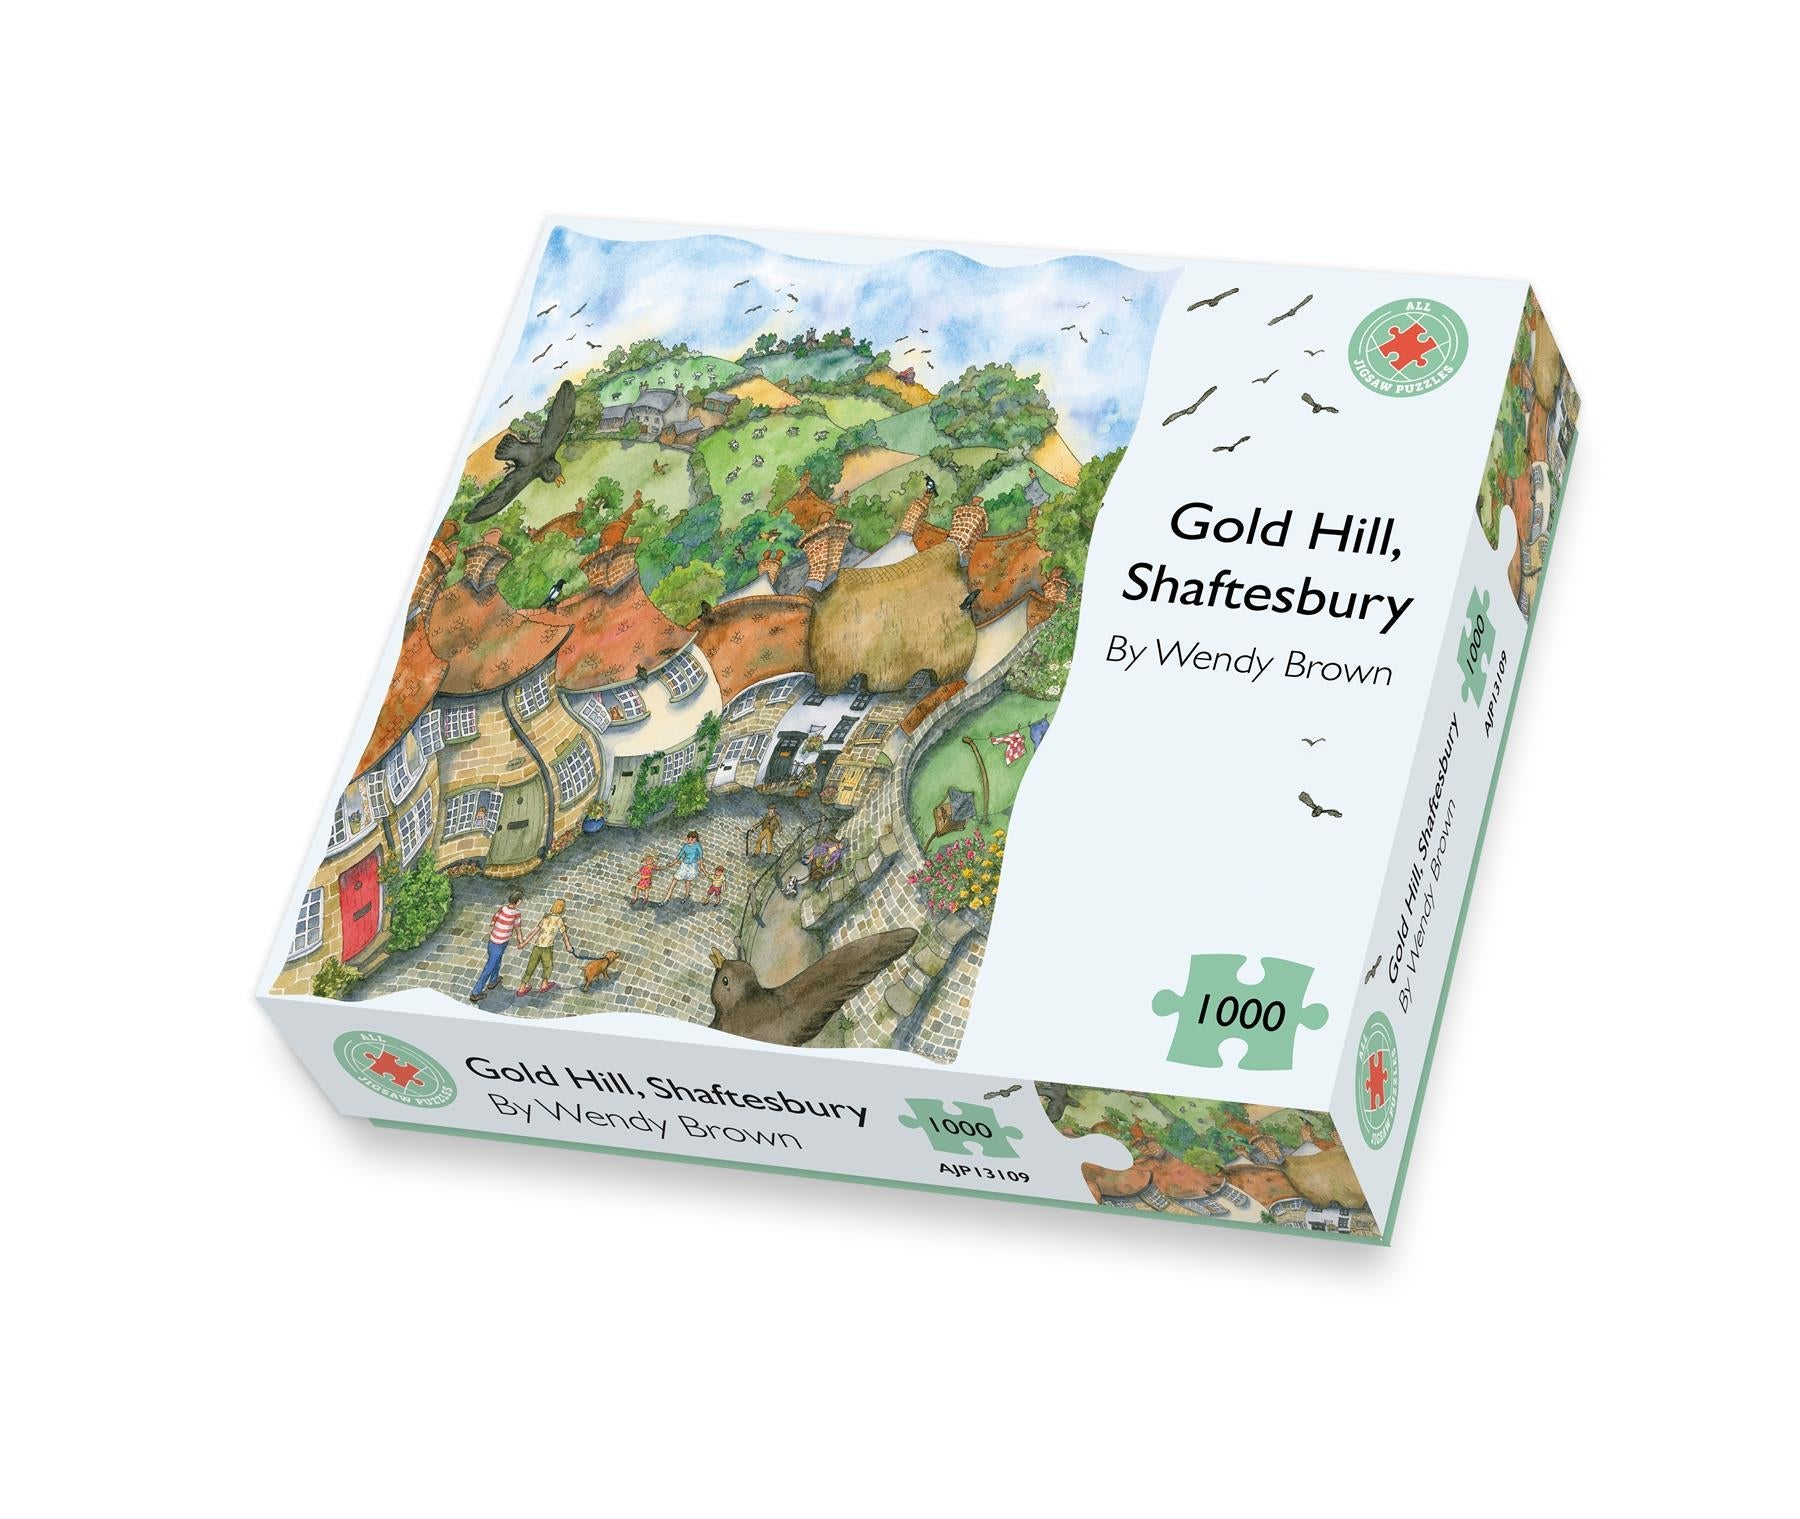 Gold Hill Shaftesbury 500 or 1000 Piece Jigsaw Puzzle box